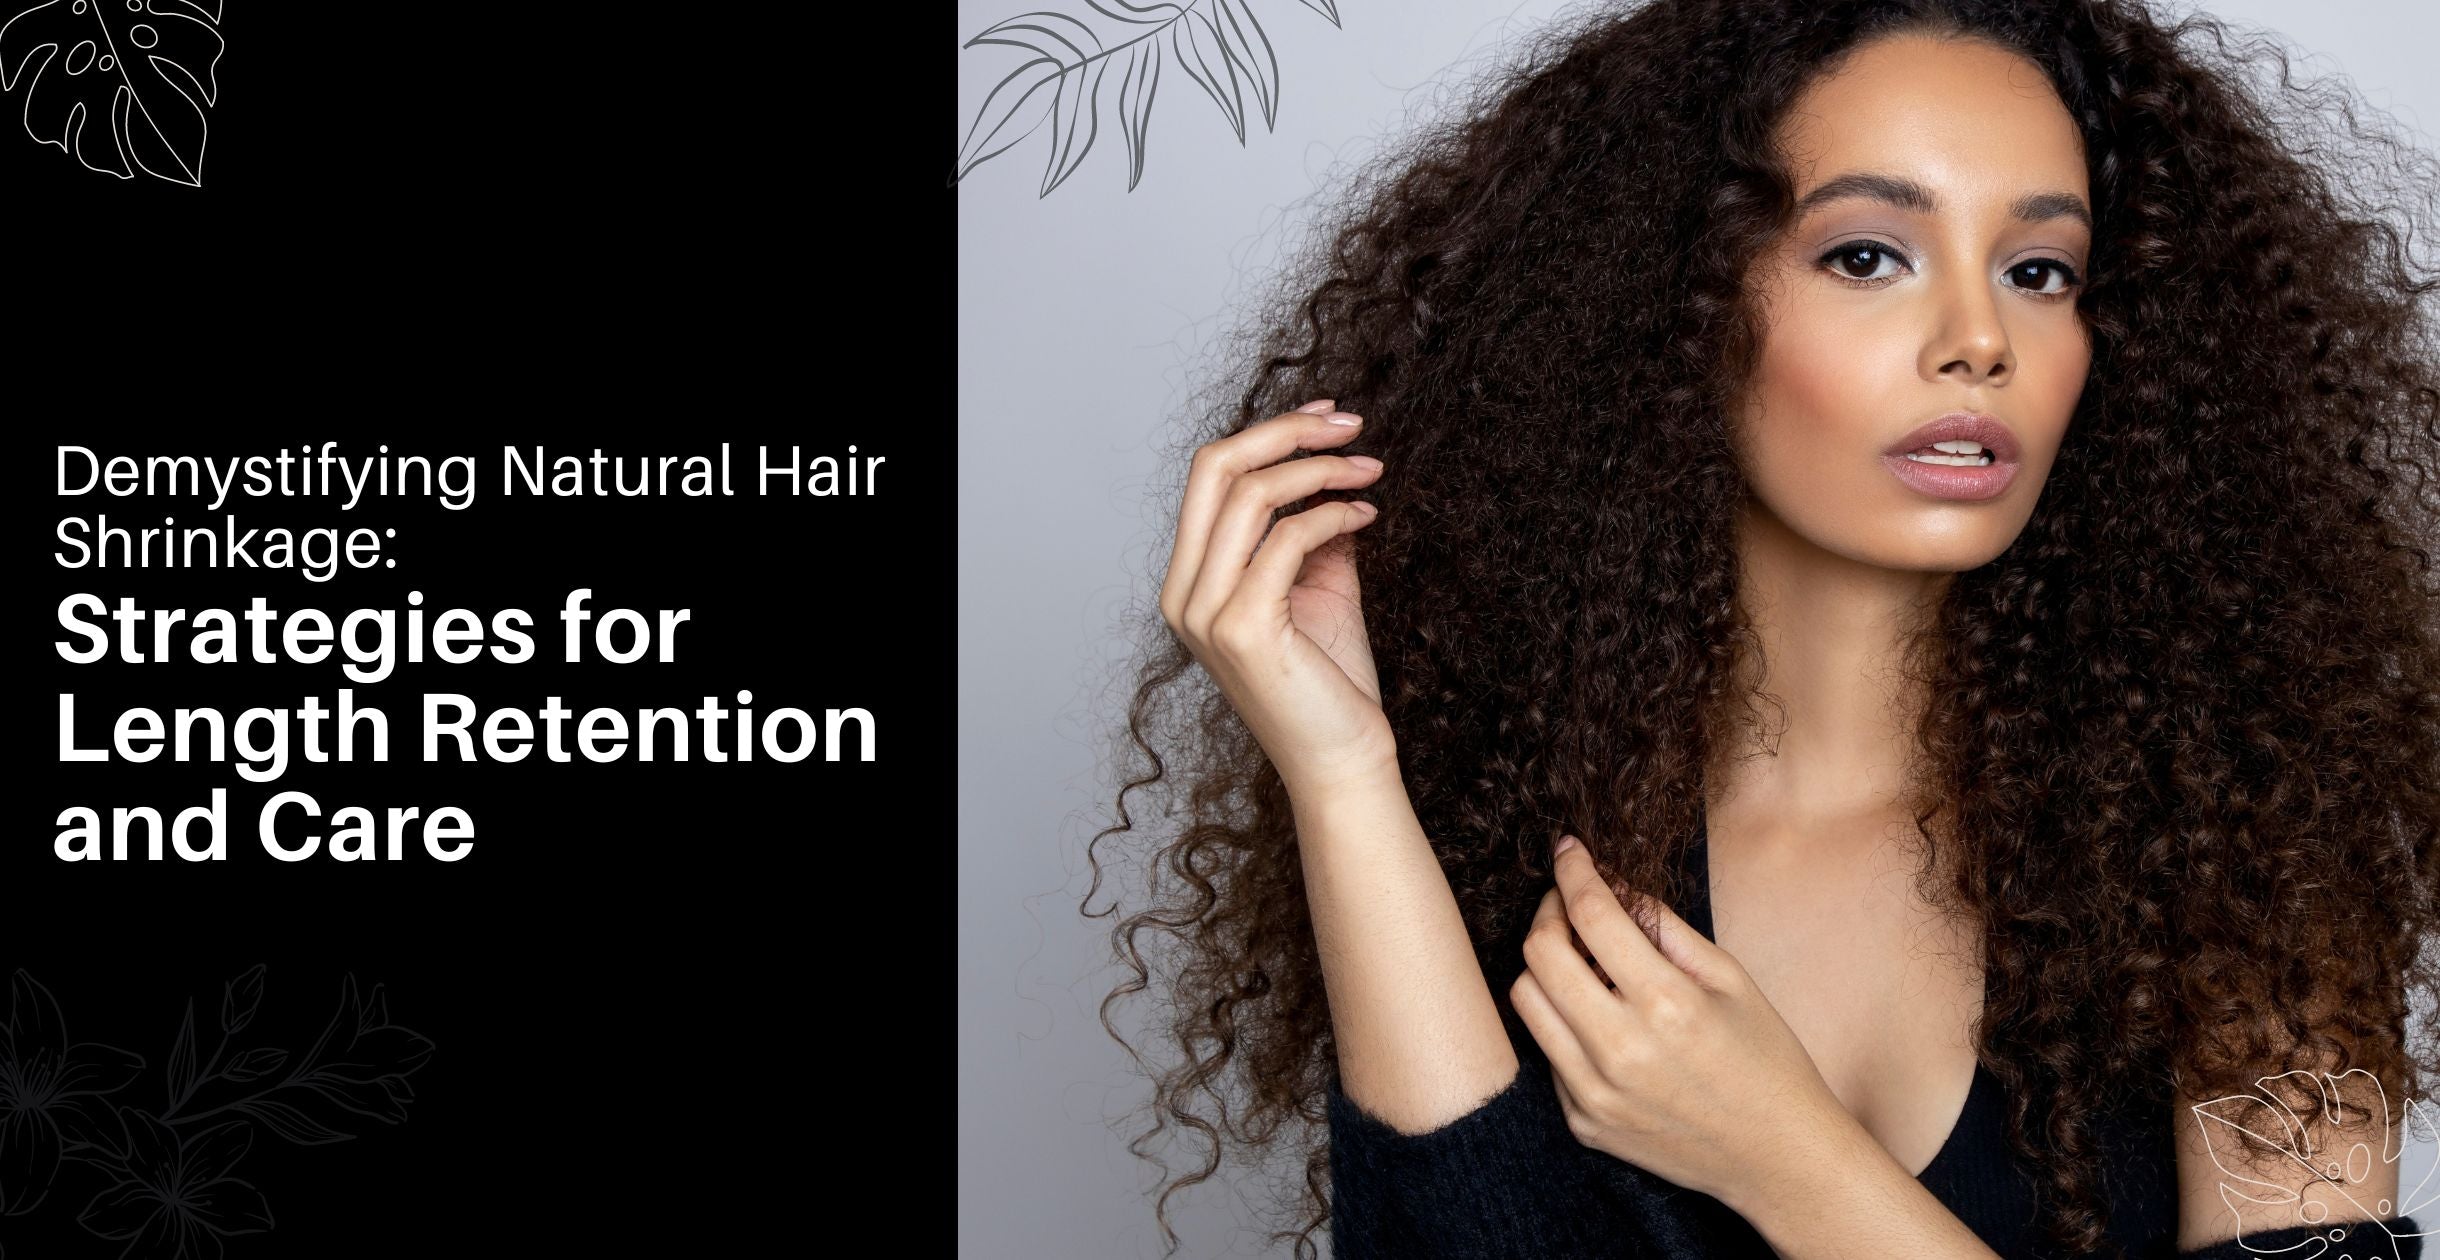 Demystifying Natural Hair Shrinkage: Strategies for Length Retention and Care